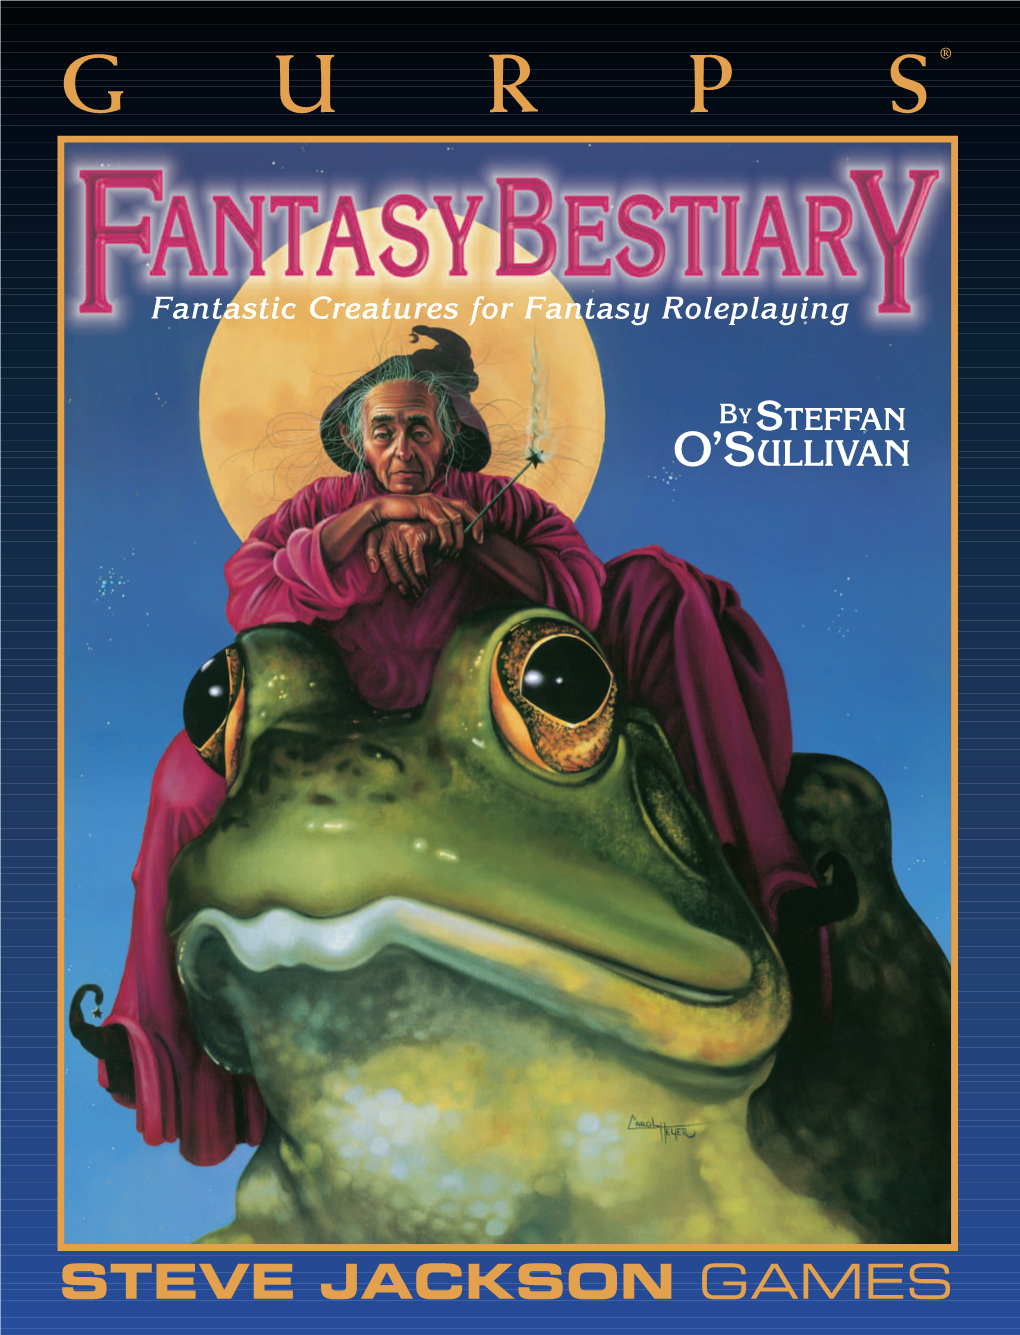 GURPS Fantasy Bestiary Also Includes: CRYPTOZOOLOGISTS: • Special Chapters on Dragons and Fabulous Written by Plants, with Many Examples of Each